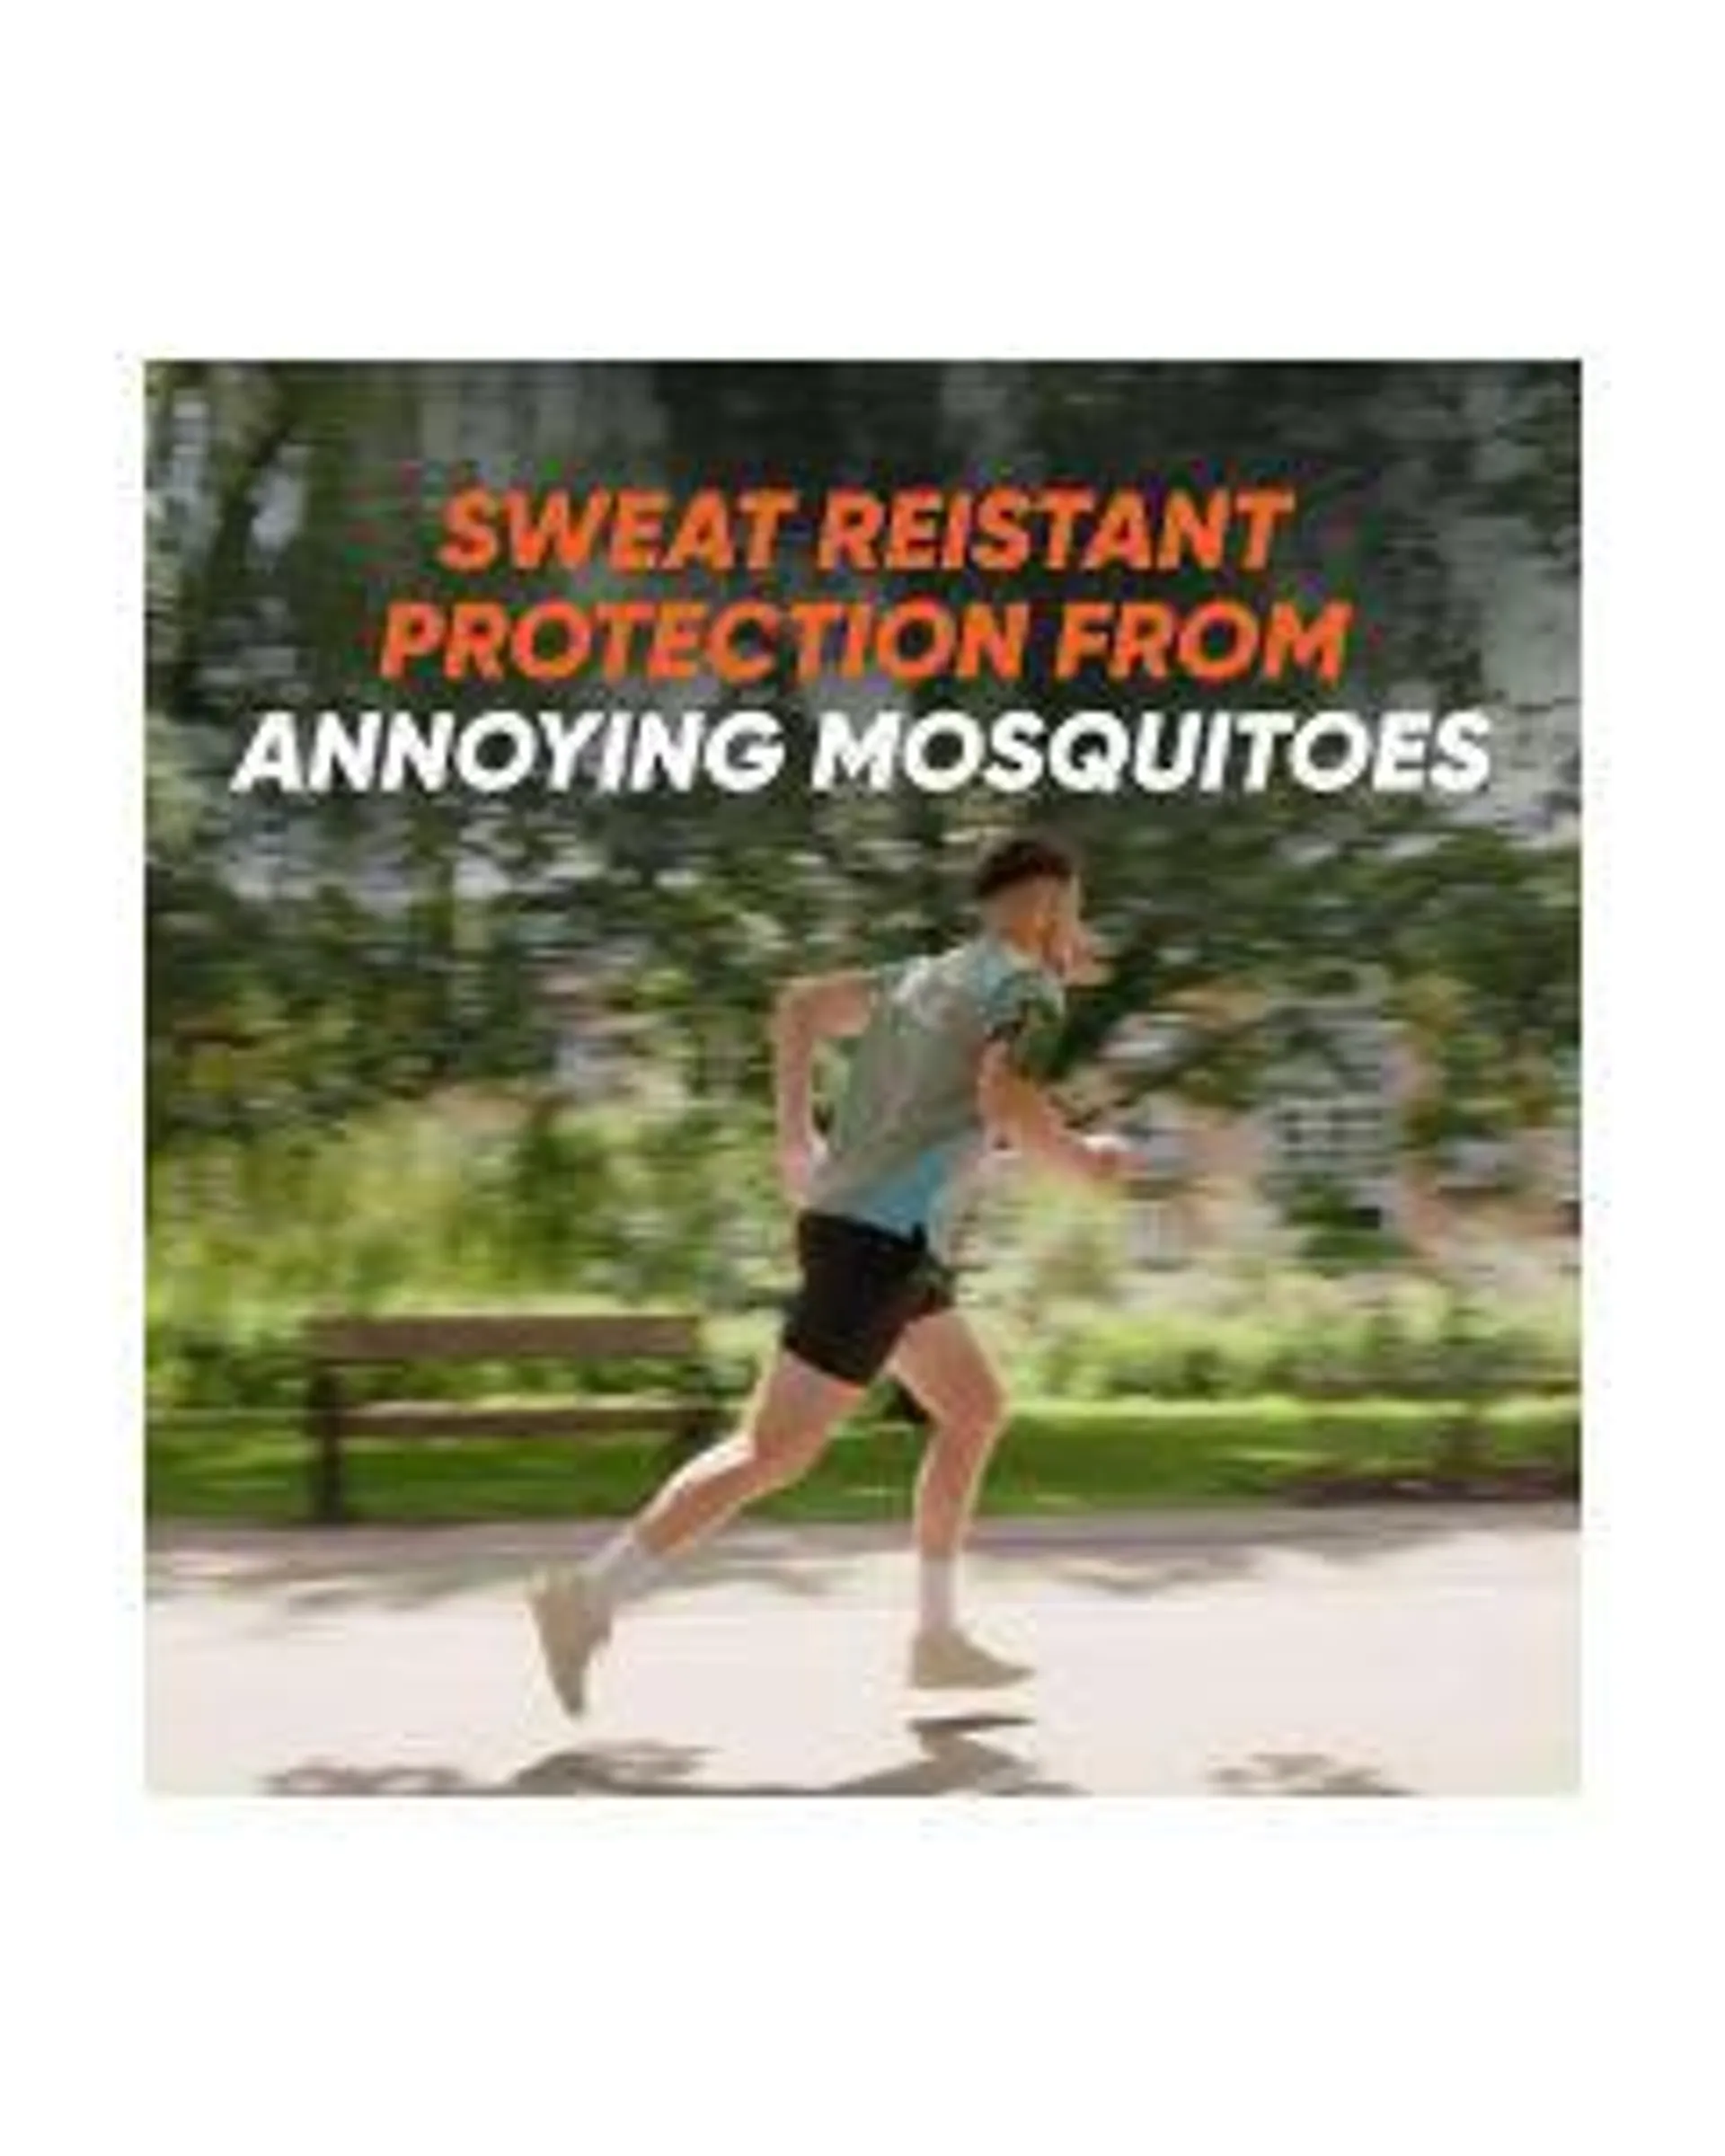 Off! Active Mosquito Repellent I, Long-Lasting Sweat Resistant Bug Spray, 7.5 Oz